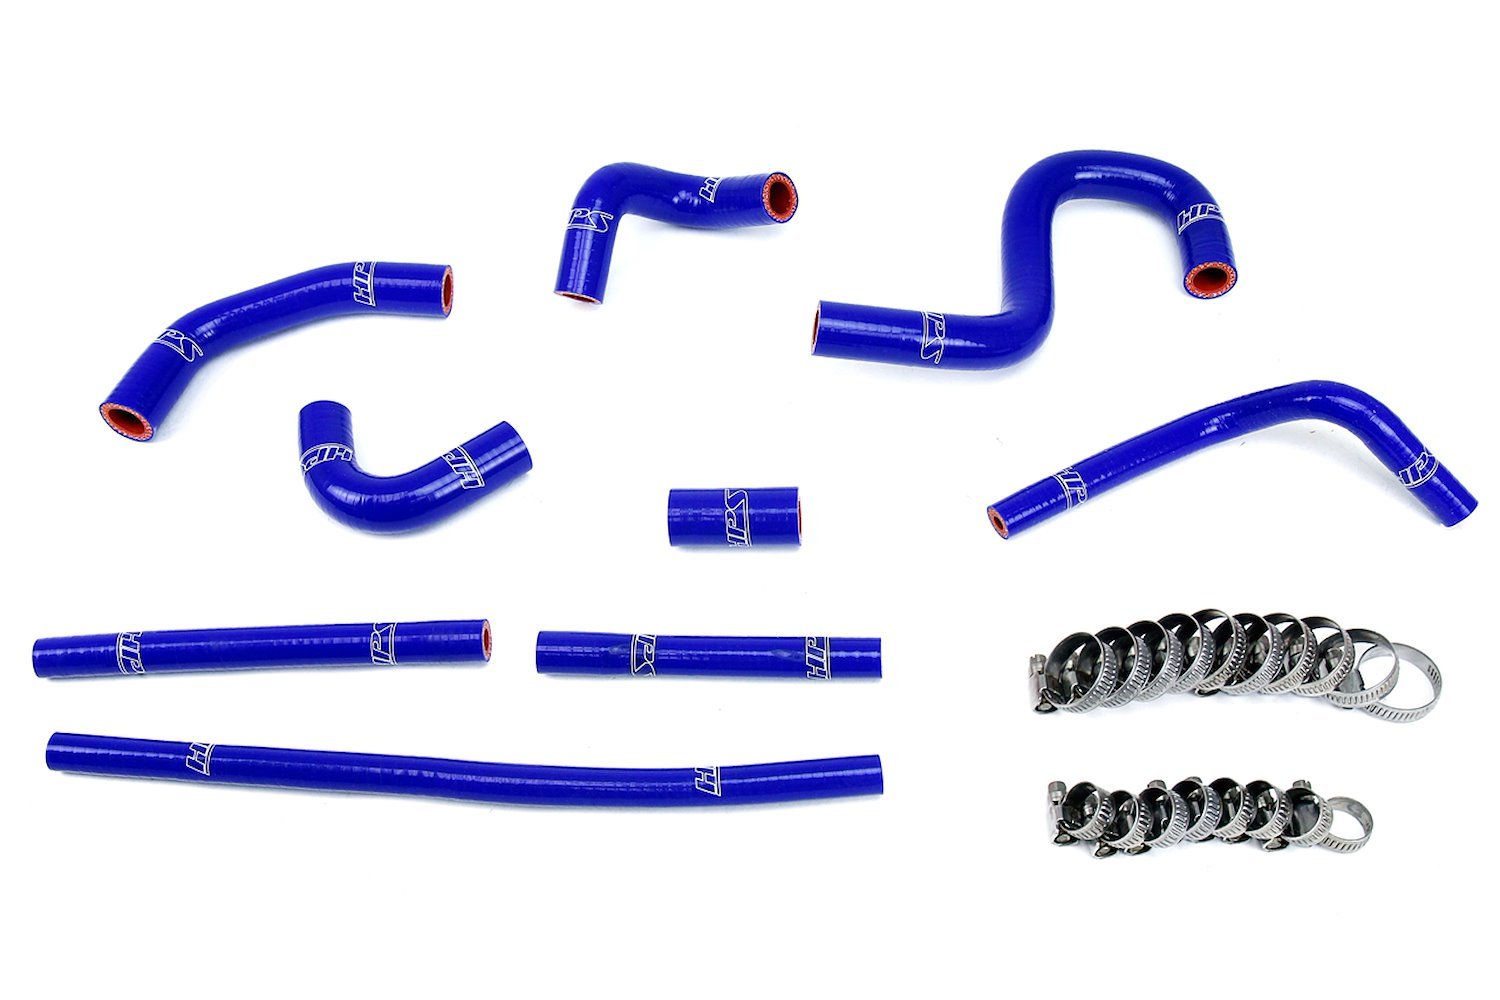 57-1798-BLUE Heater Hose Kit, High-Temp 3-Ply Reinforced Silicone, Replace OEM Rubber Heater Coolant Hoses